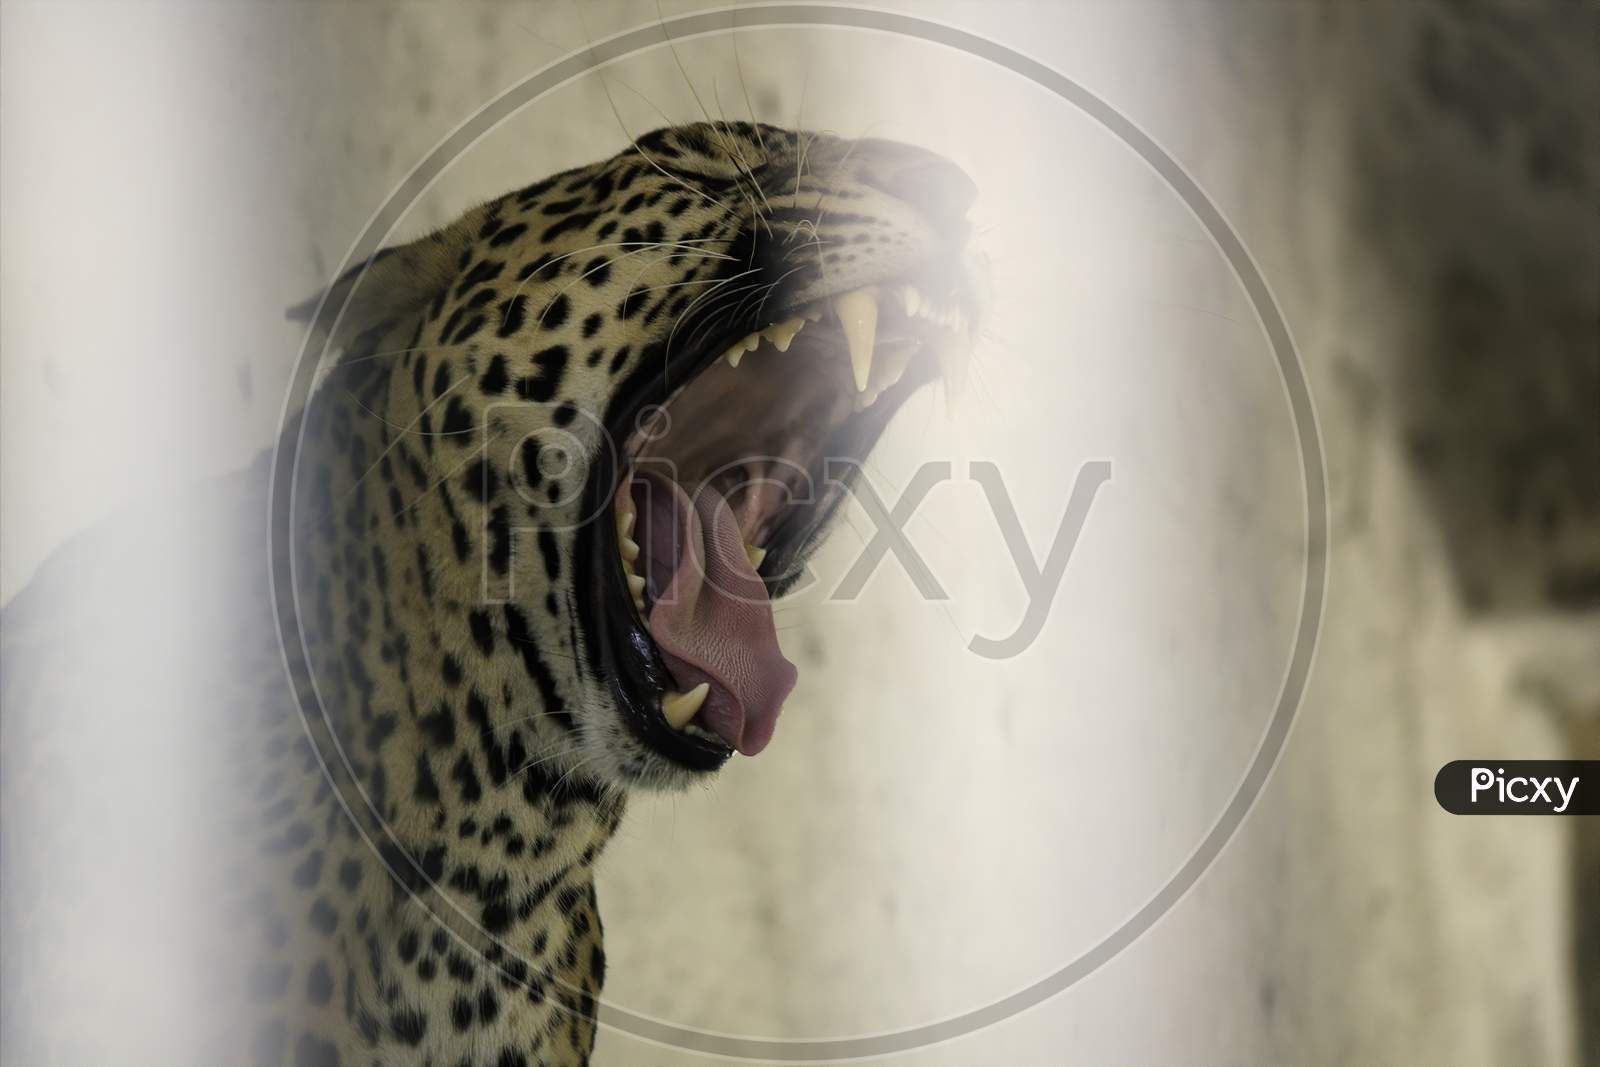 A Closeup Of A Leopard Roar With It'S Teeth And Tongue Visible